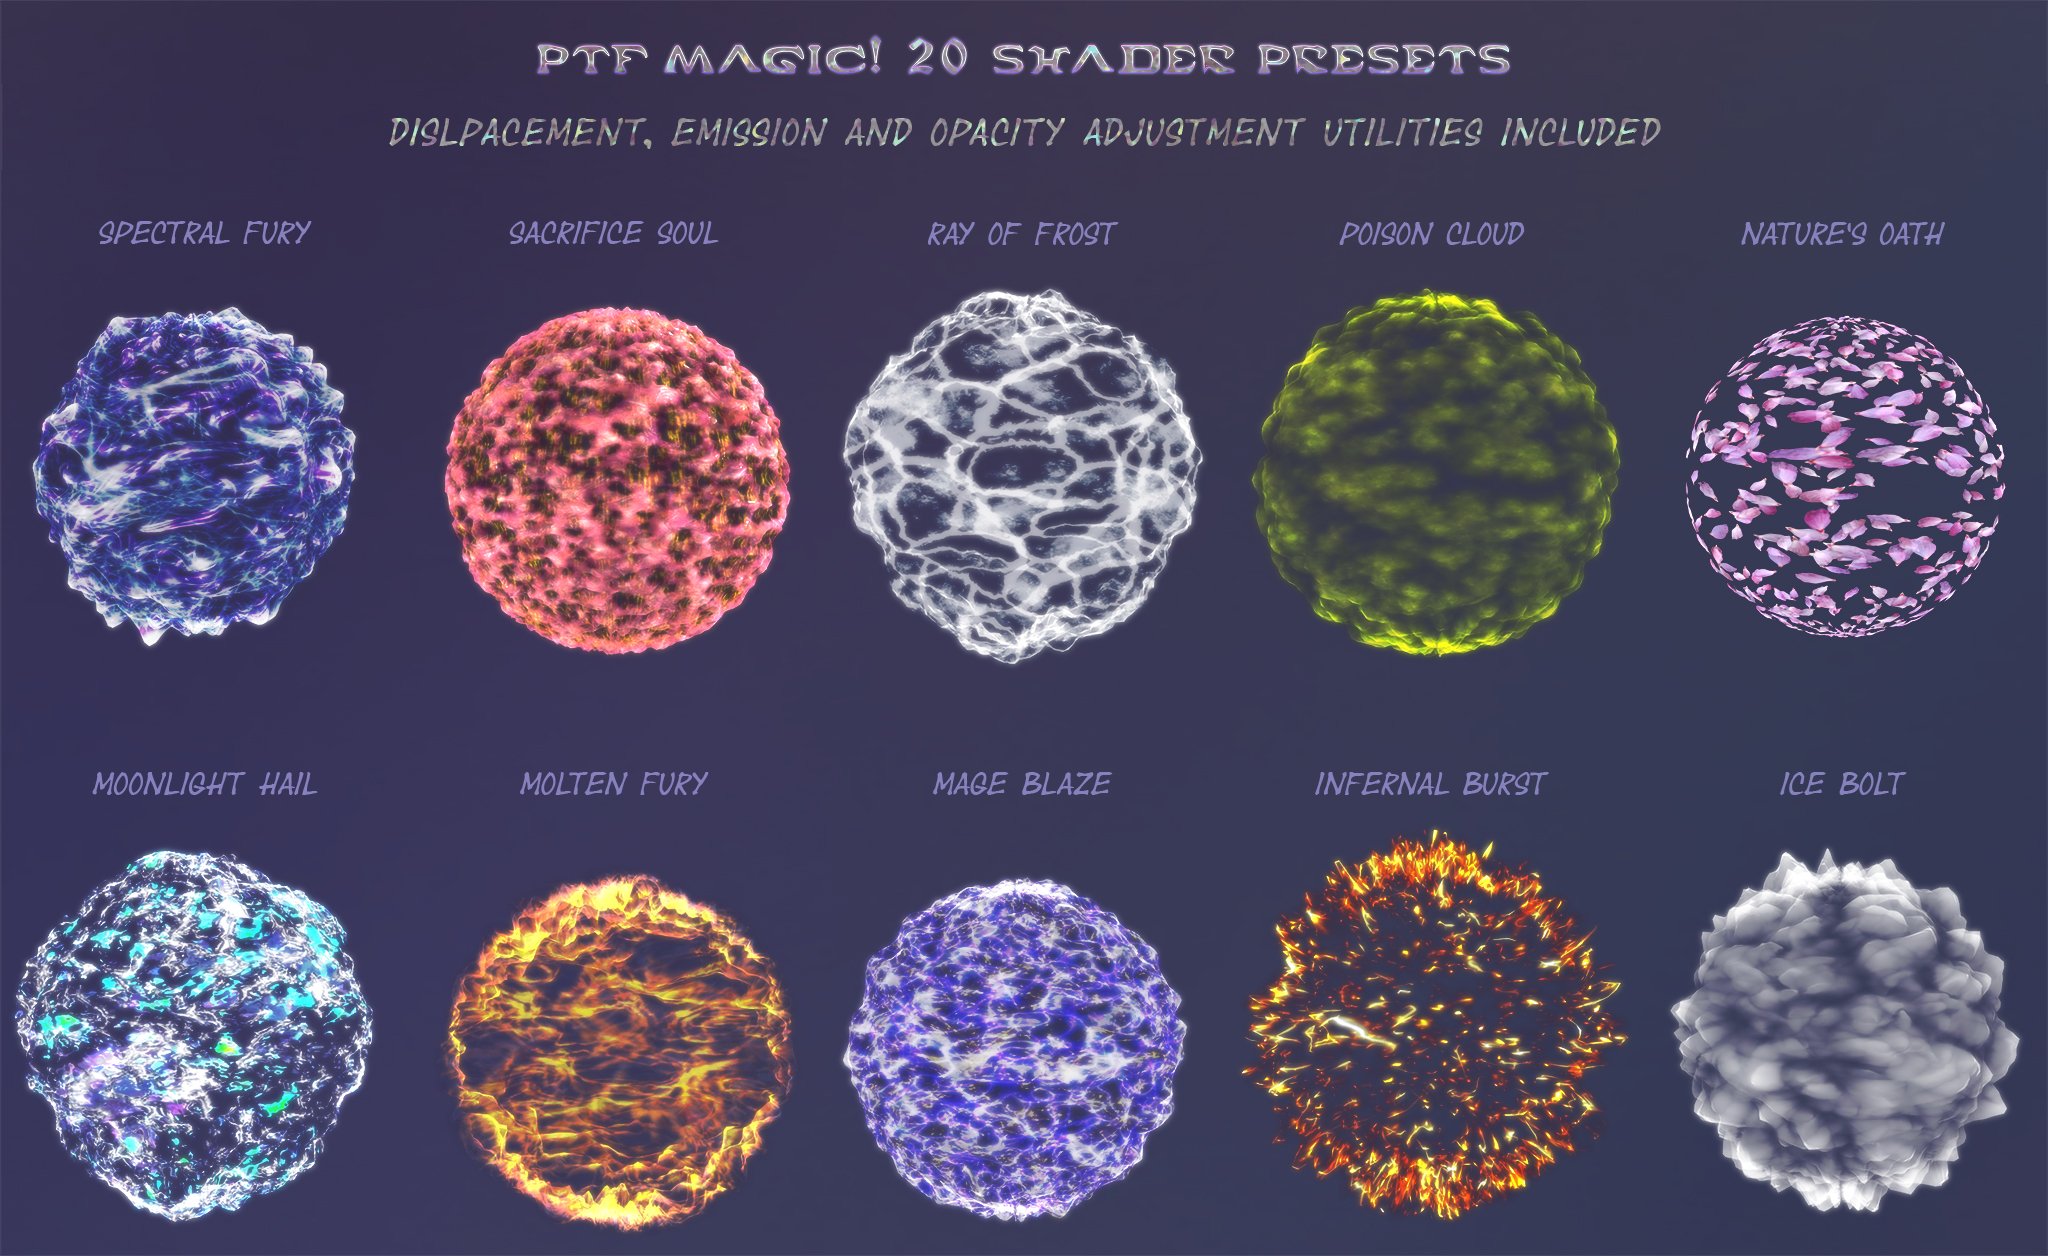 PTF Magic! Shaders and Wearables for Genesis 3 and 8 by: PixelTizzyFit, 3D Models by Daz 3D